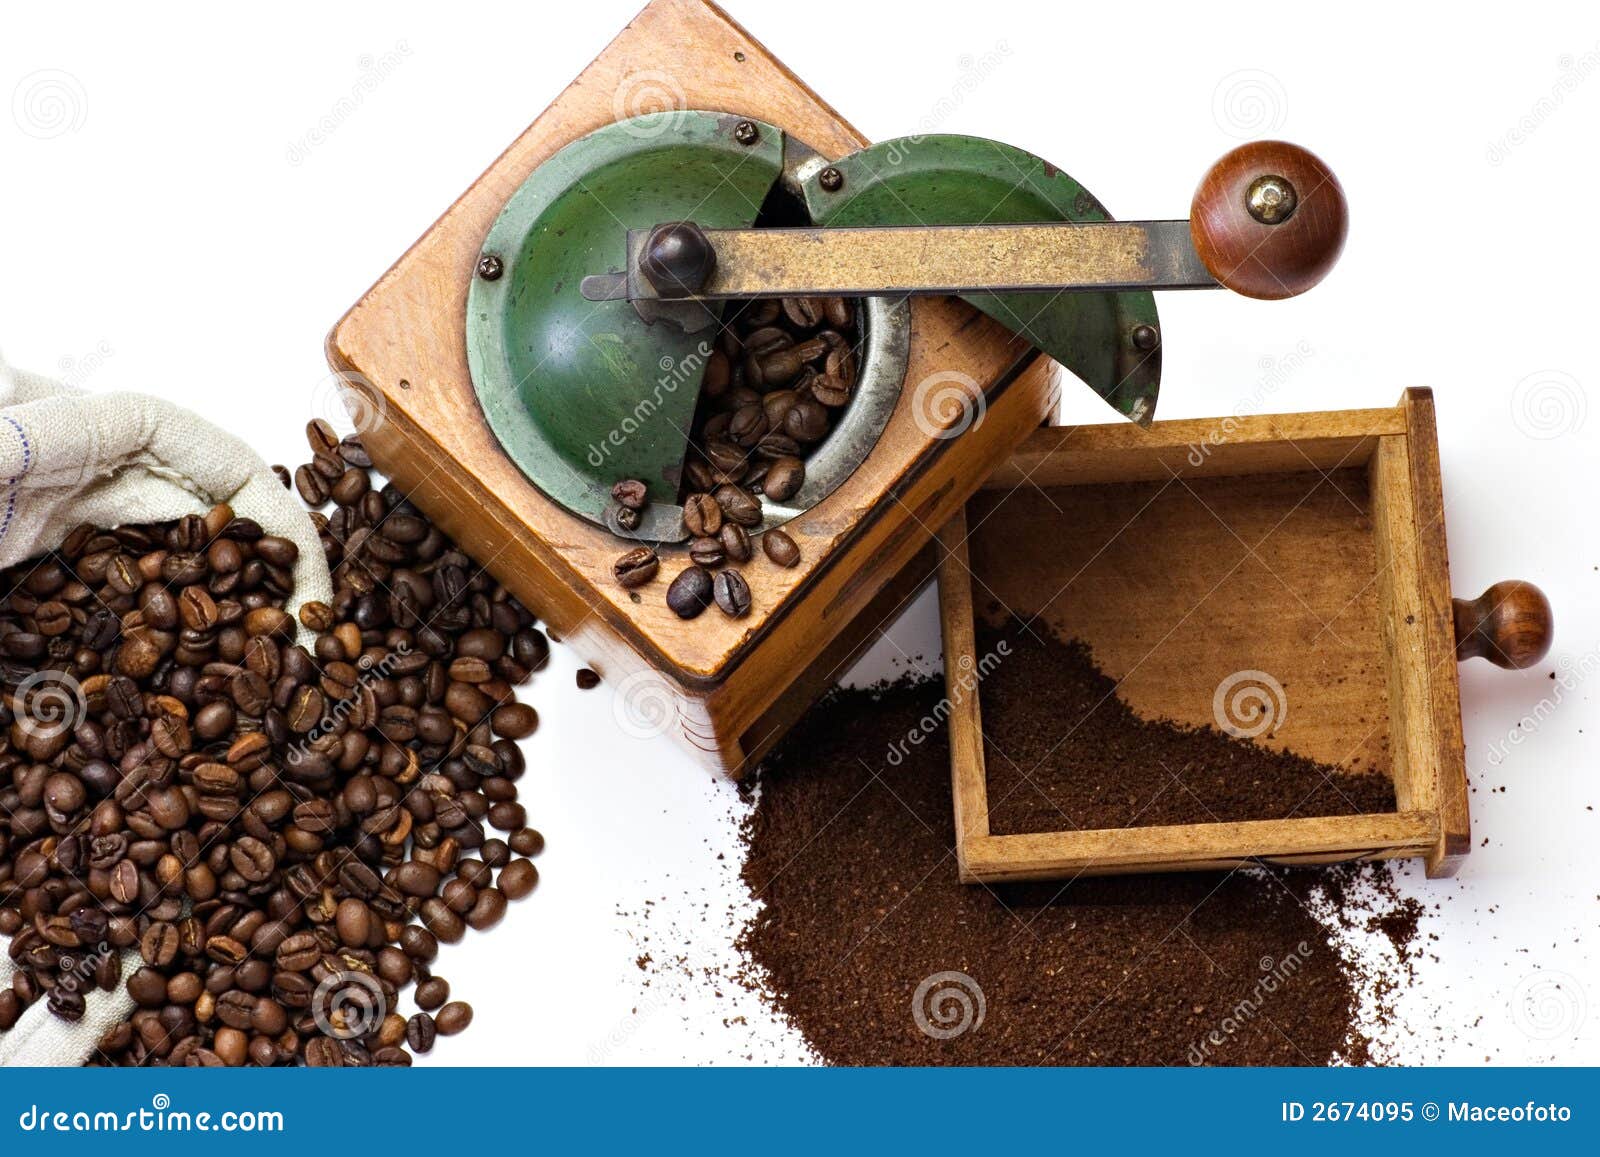 Coffee Cup with Nostalgic Coffee Grinder on Background Stock Image